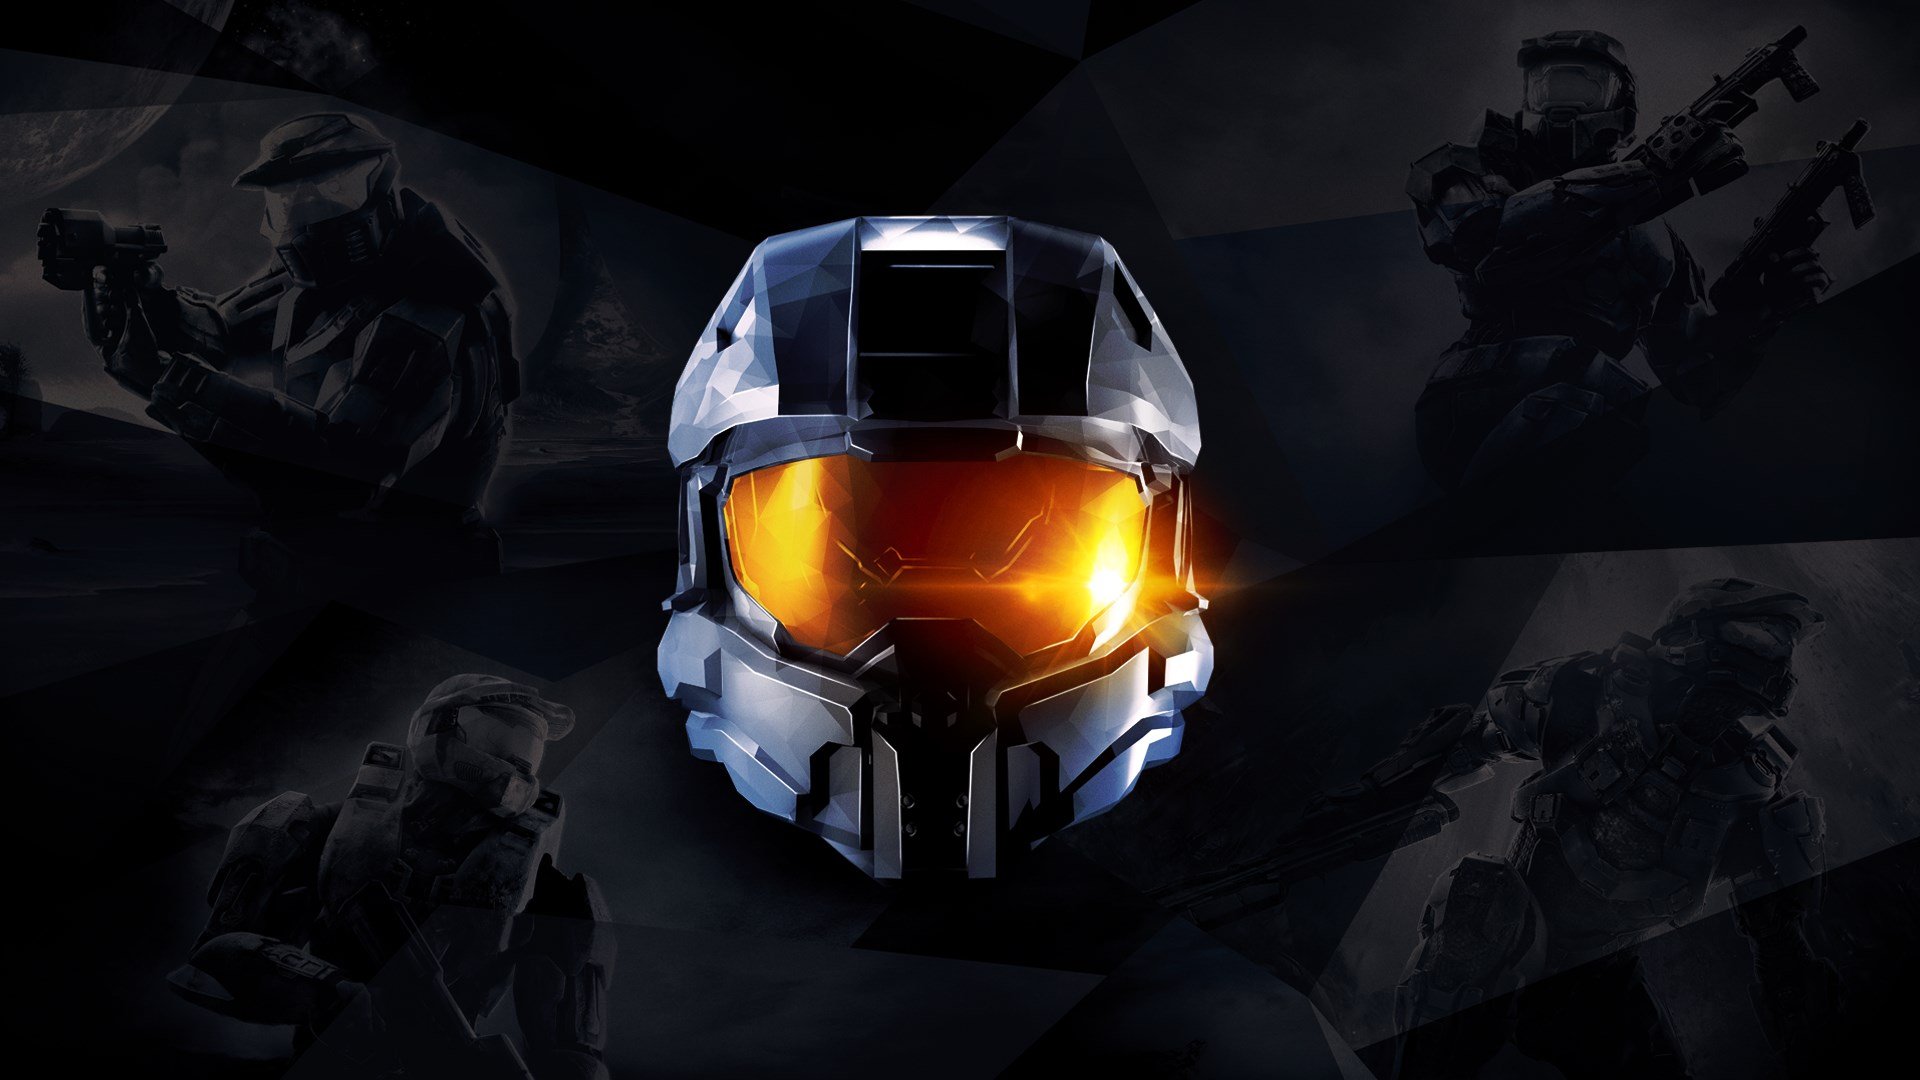 Halo: The Master Chief Collection cover image